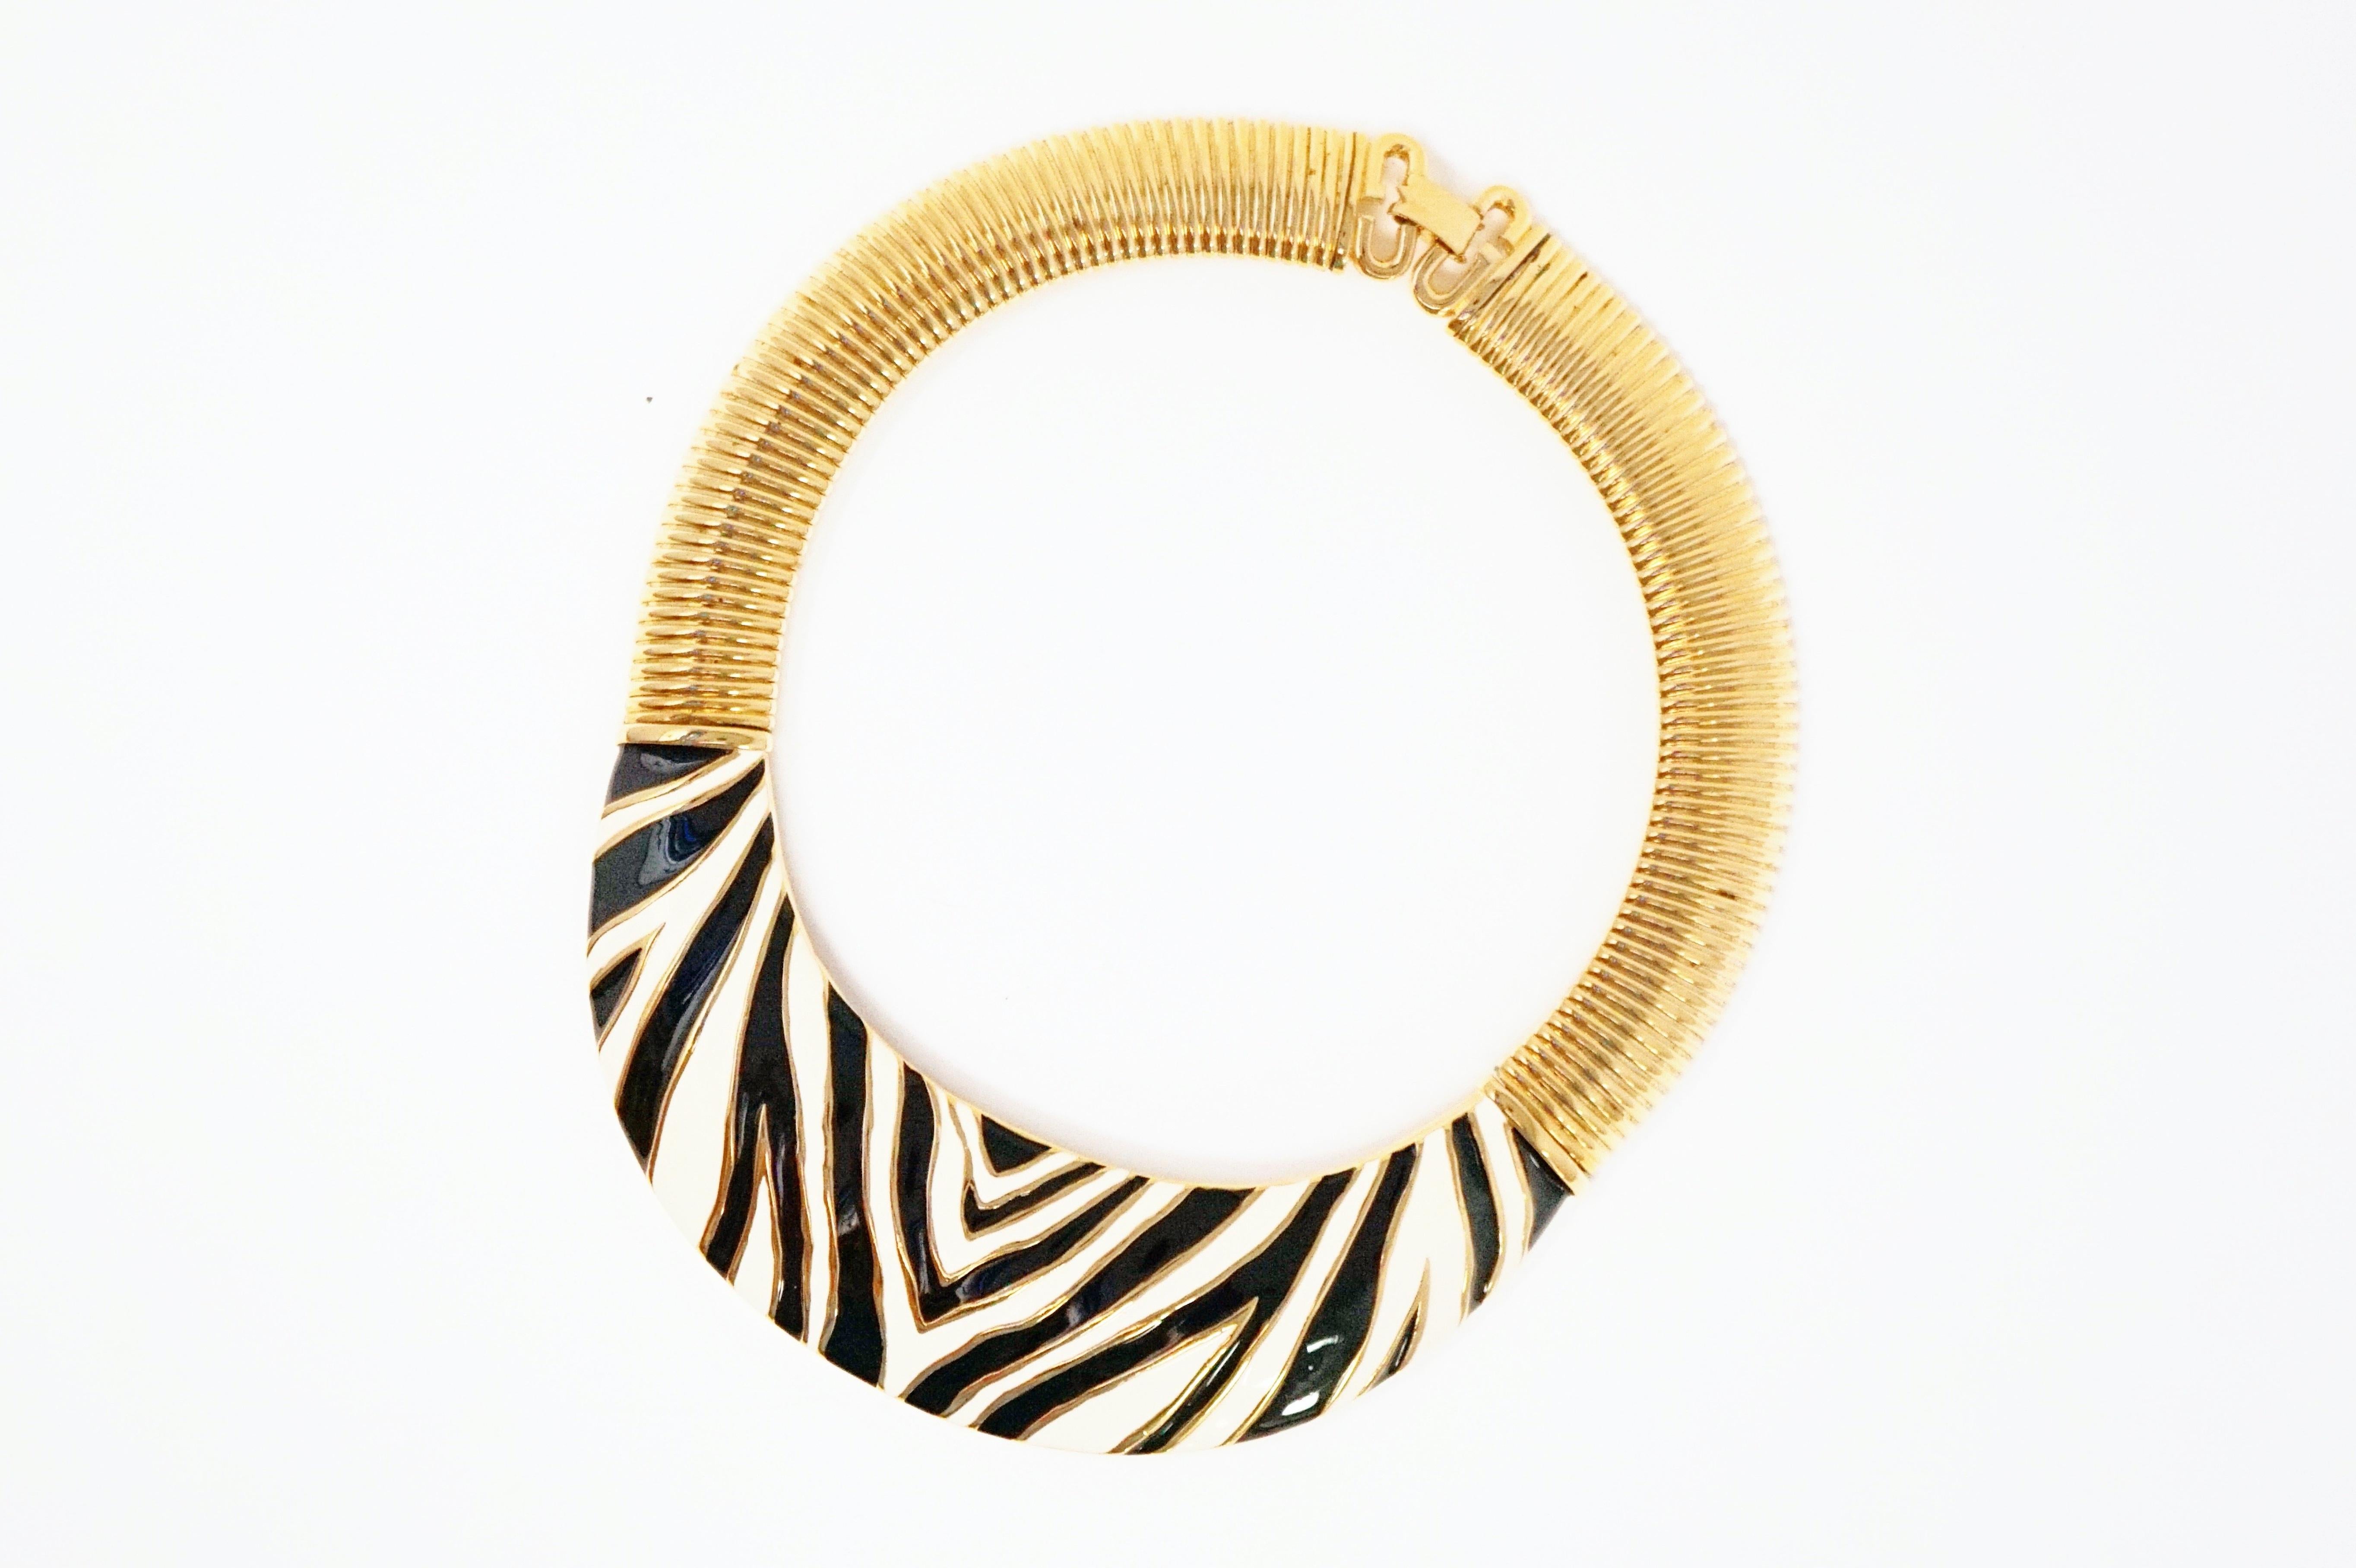 - Oversized, quintessential 80s piece
- Zebra motif
- Gold plated
- Black & white enamel detail
- Thick snake chain
- Signature 